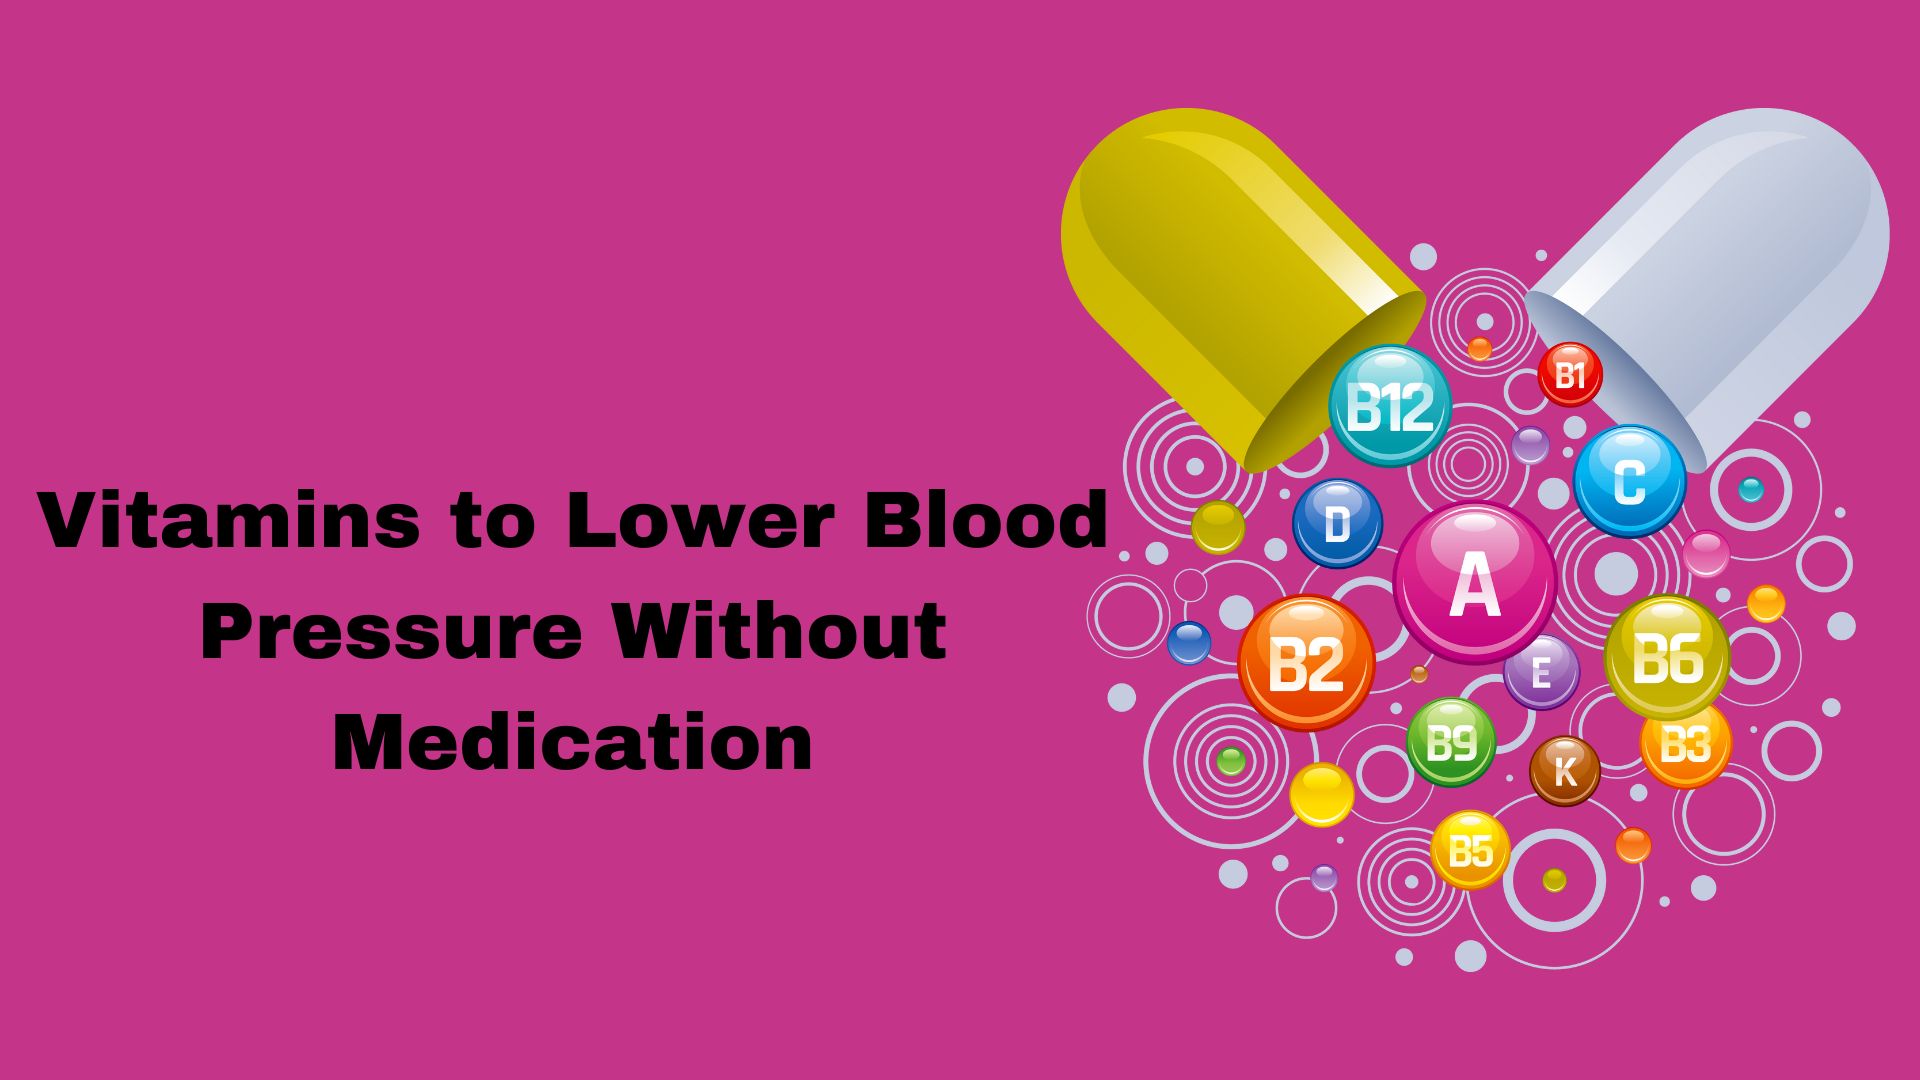 Vitamins to Lower Blood Pressure Without Medication